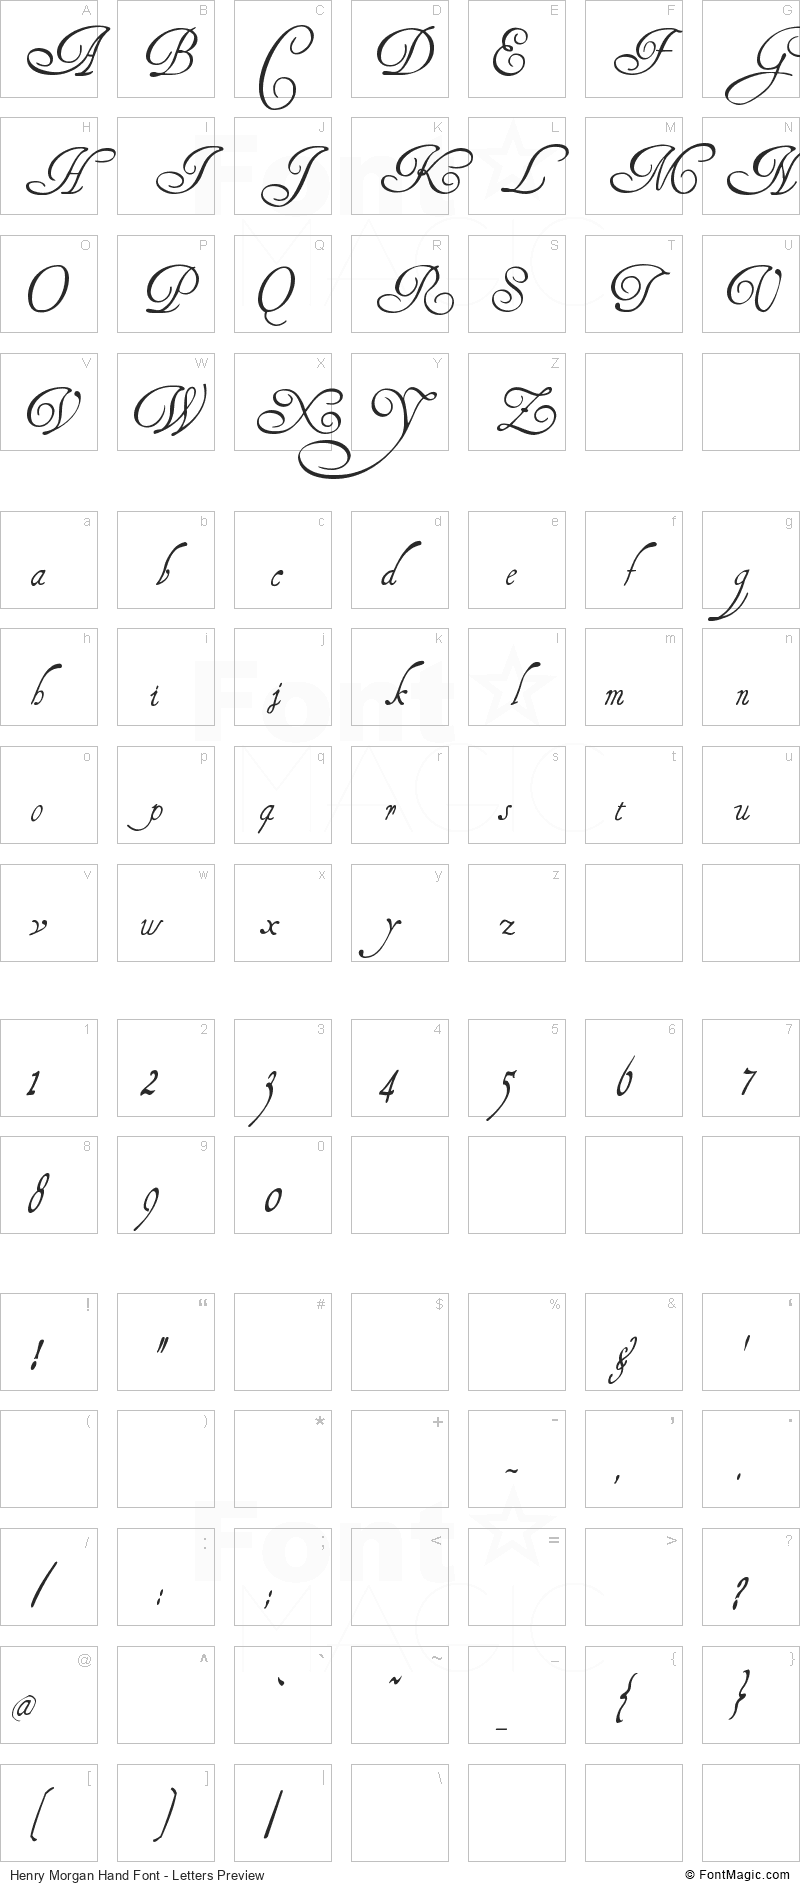 Henry Morgan Hand Font - All Latters Preview Chart